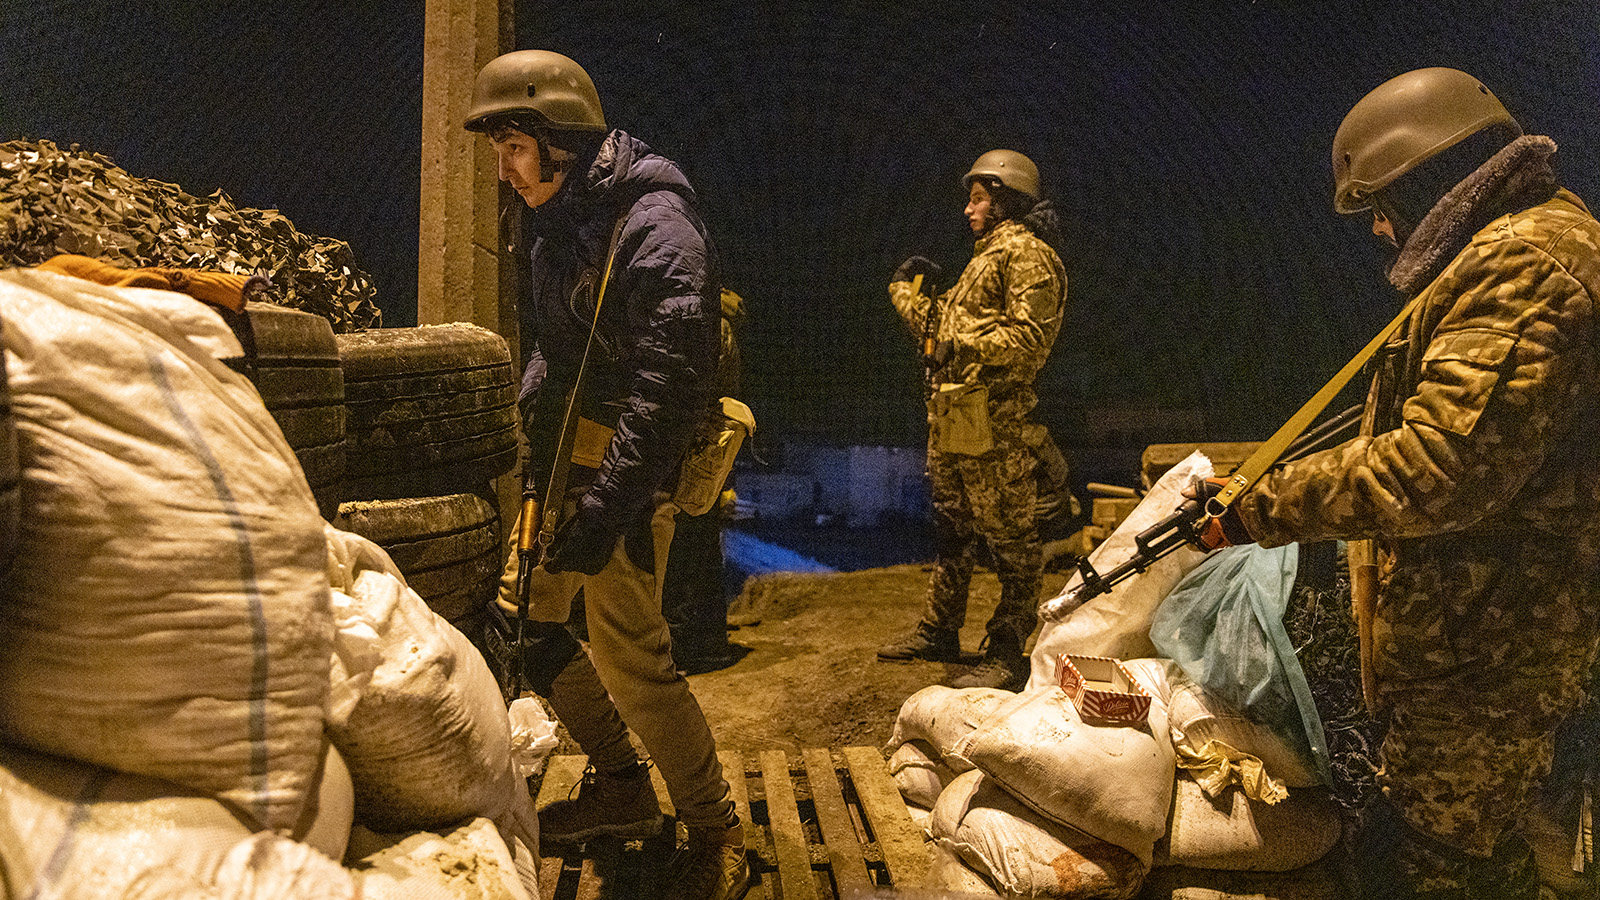 Members of a territorial defense unit watch as a car approaches their barricade after curfew on the outskirts of eastern Kyiv on March 6, 2022 in Kyiv, Ukraine.  Russia is continuing its assault on major Ukrainian cities, including the capital Kiev, more than a week after launching a full-scale invasion of the country.